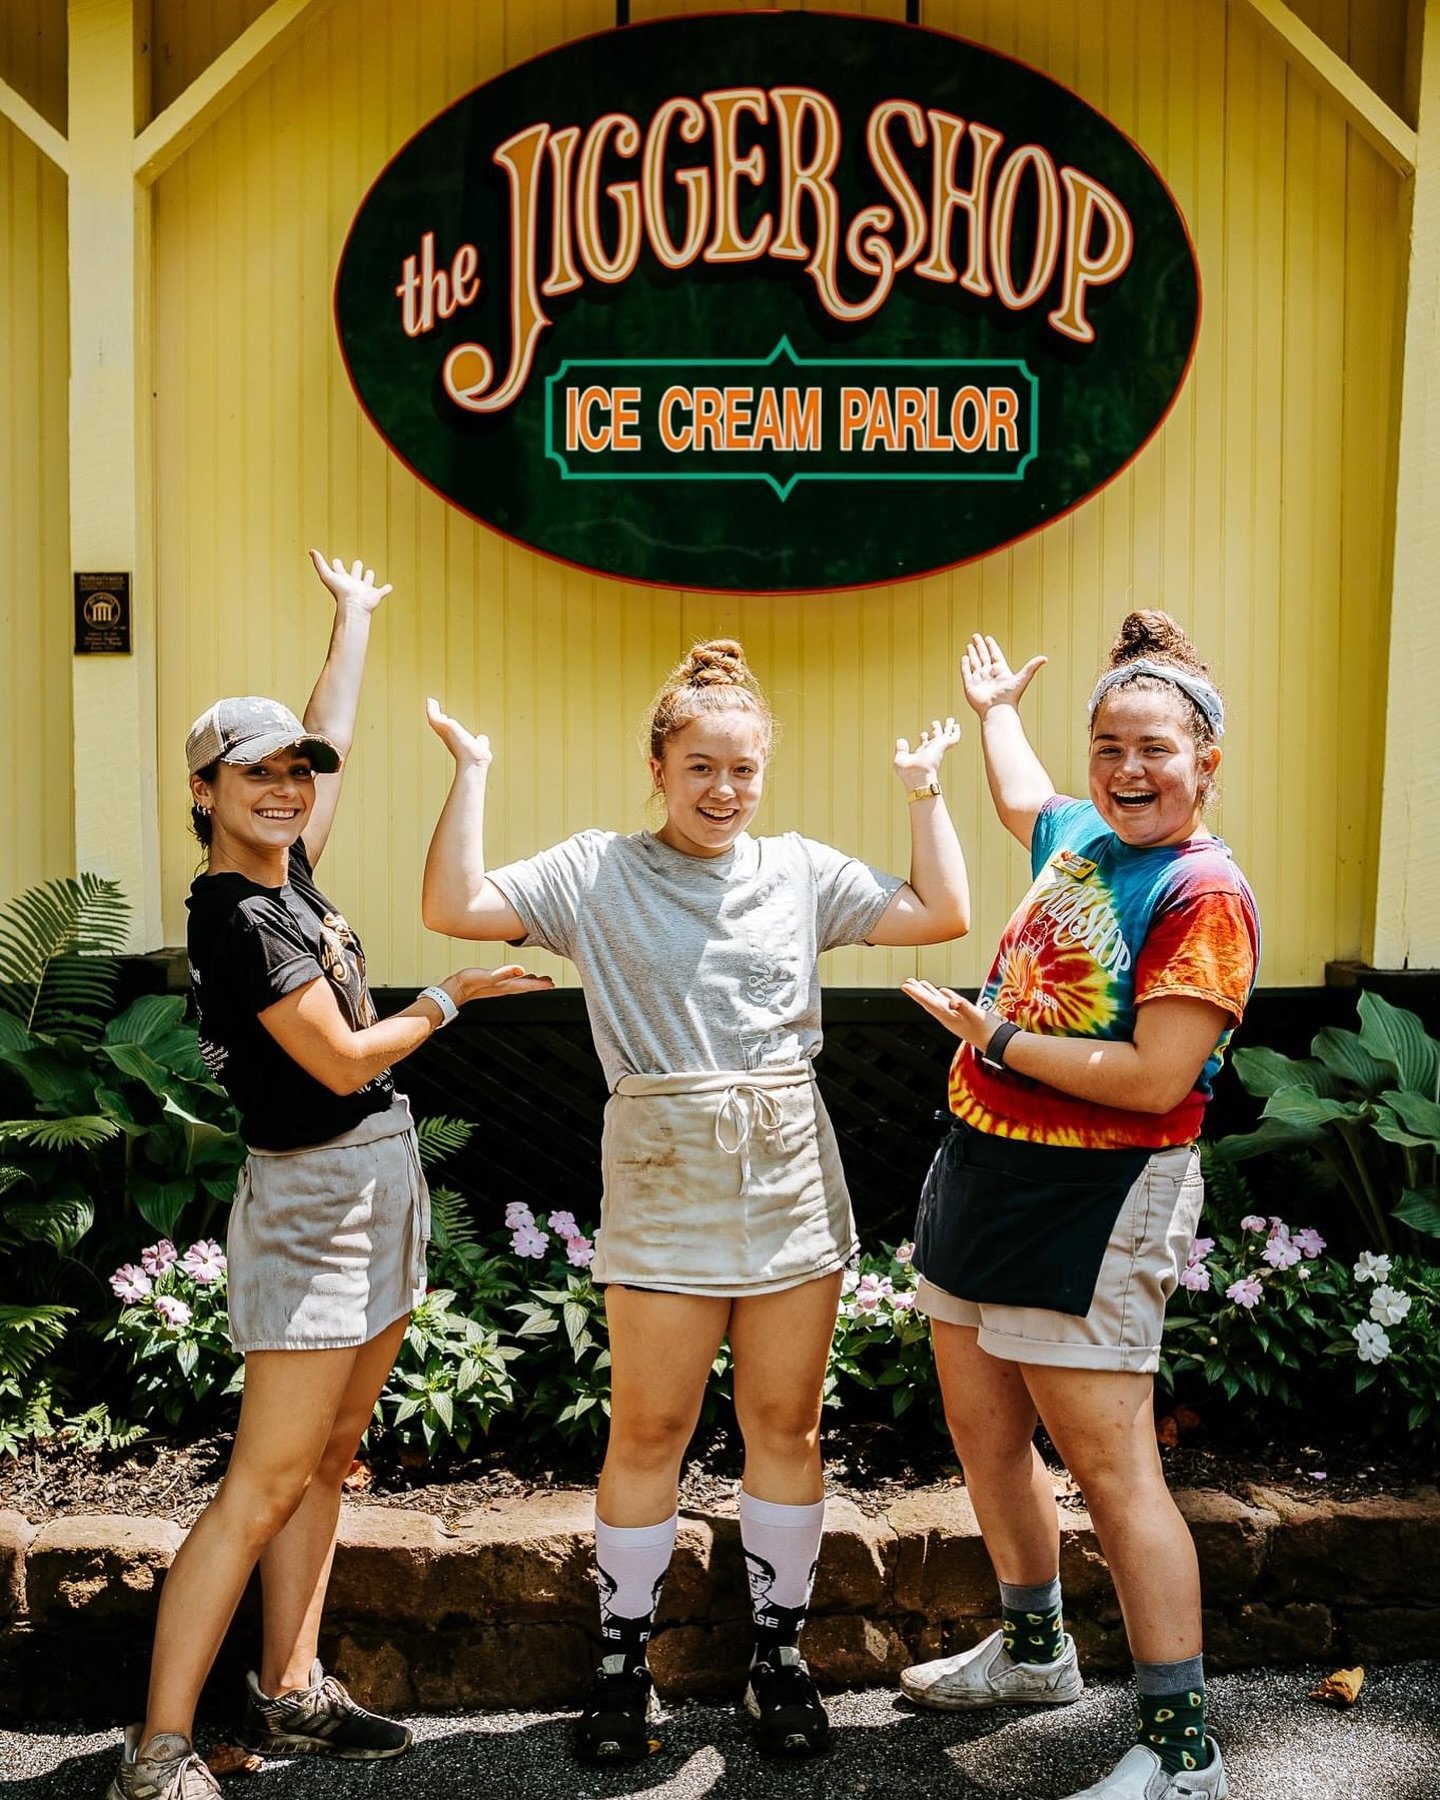 At the Jigger Shop, we count the memories, not the calories. So join us on our opening day, May 11th, and treat yourself to something sweet!🍦